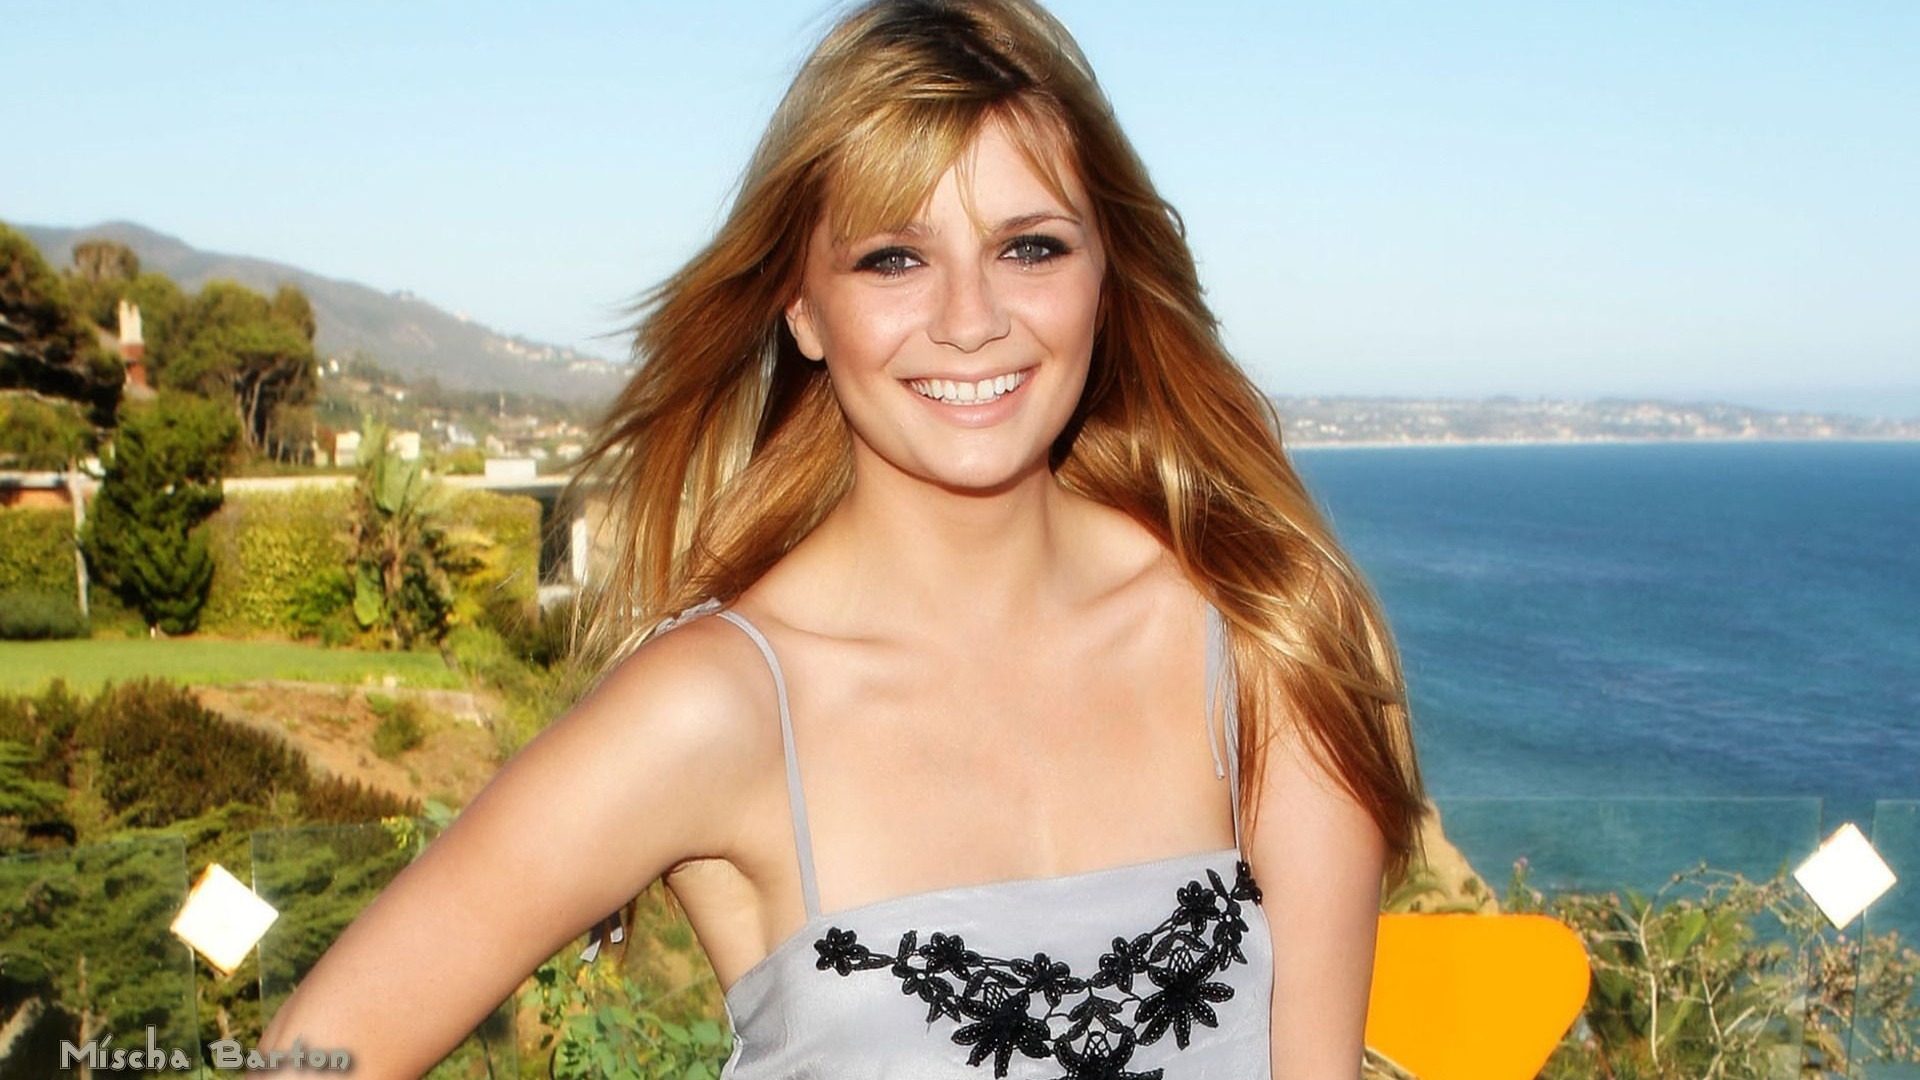 Mischa Barton #075 - 1920x1080 Wallpapers Pictures Photos Images